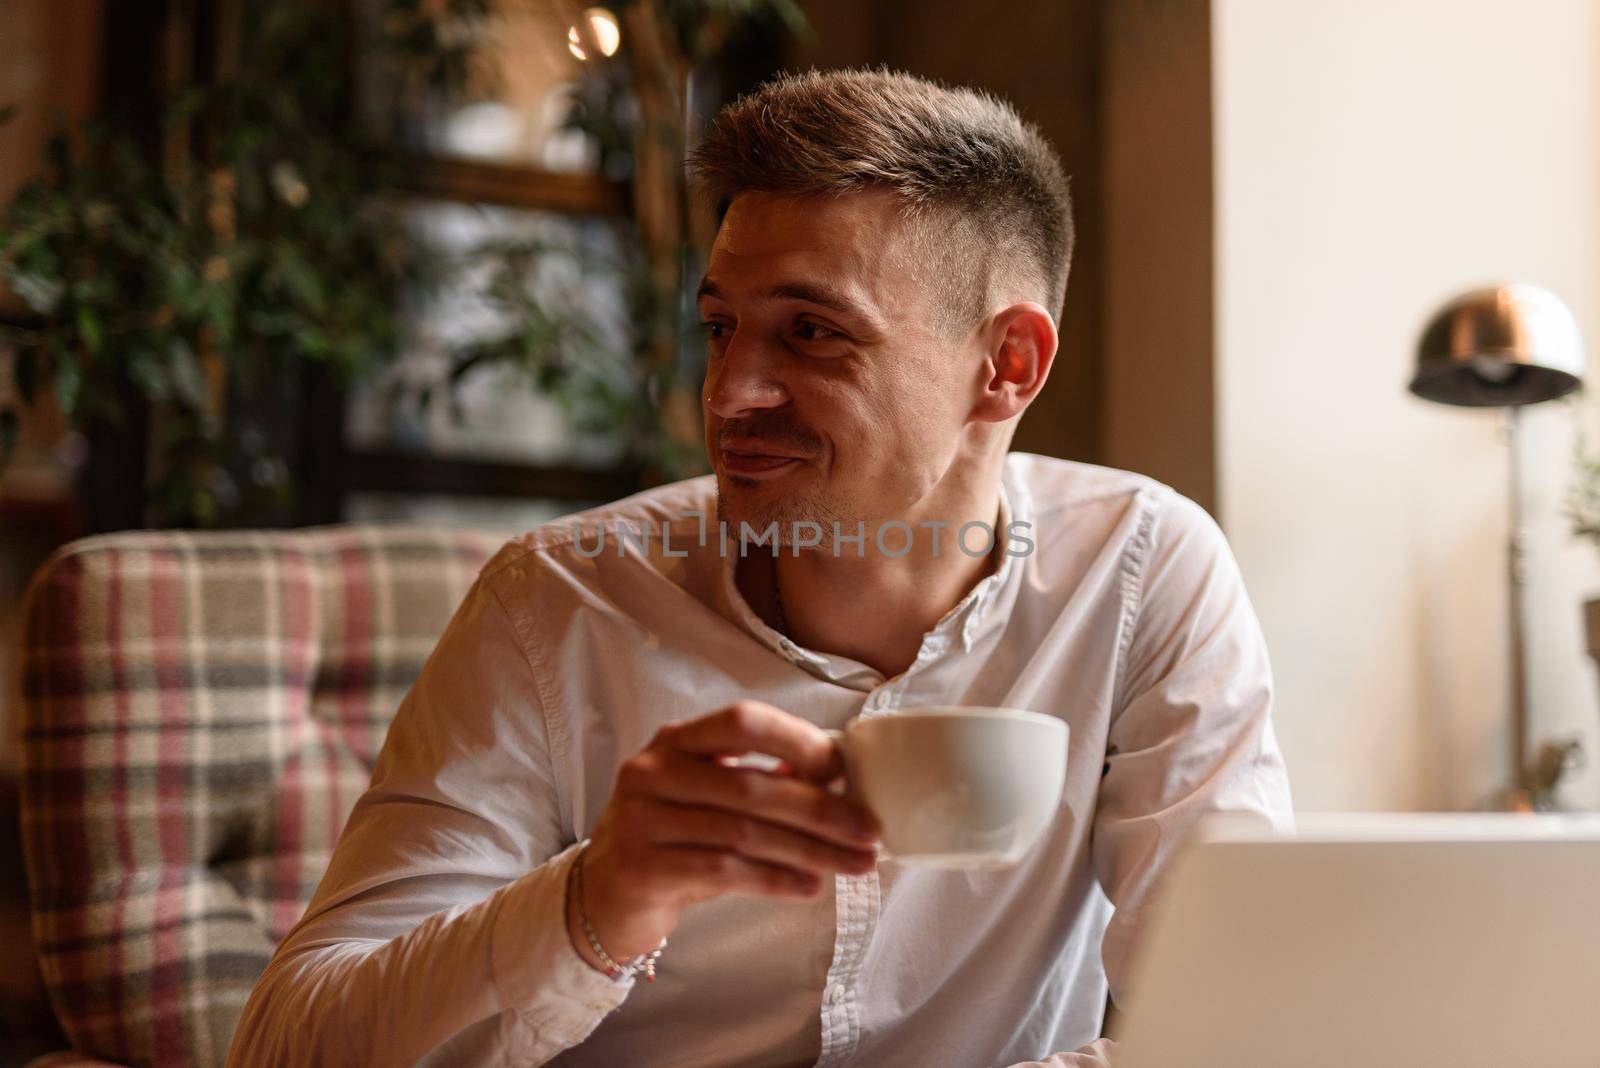 Portrait of smiling handsome guy enjoying tea while working with laptop in coffee shop. Lifestyle concept